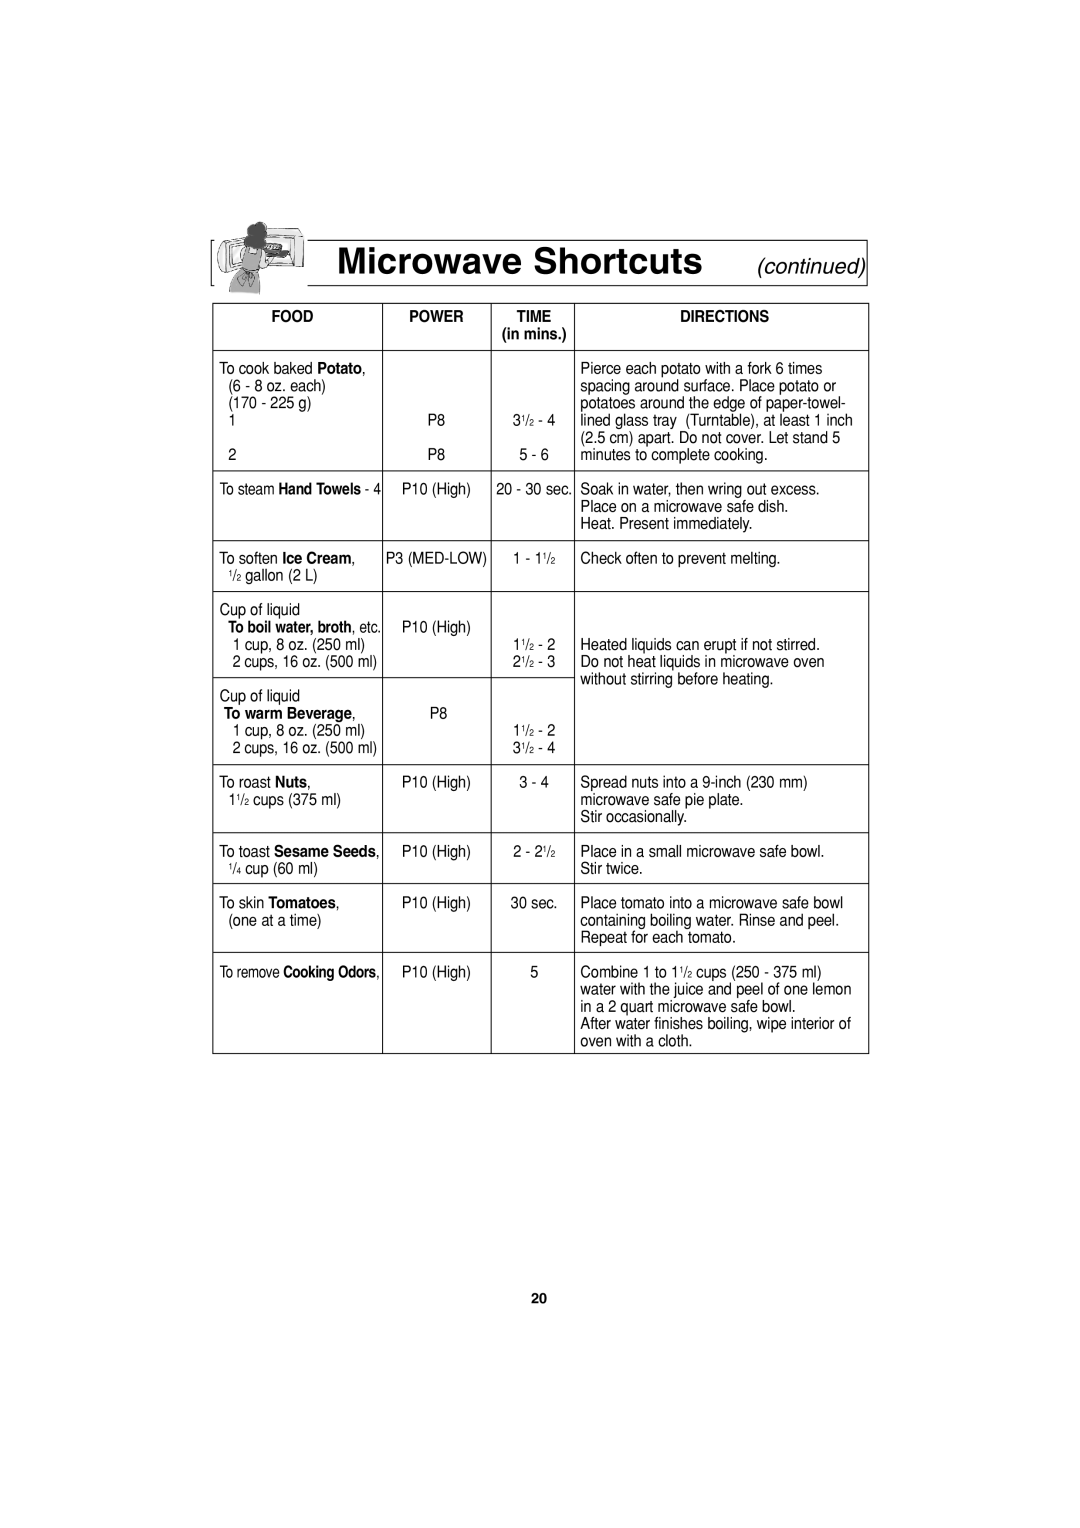 Panasonic NN-S443 important safety instructions Microwave Shortcuts, continued, Food, Directions, To warm Beverage 